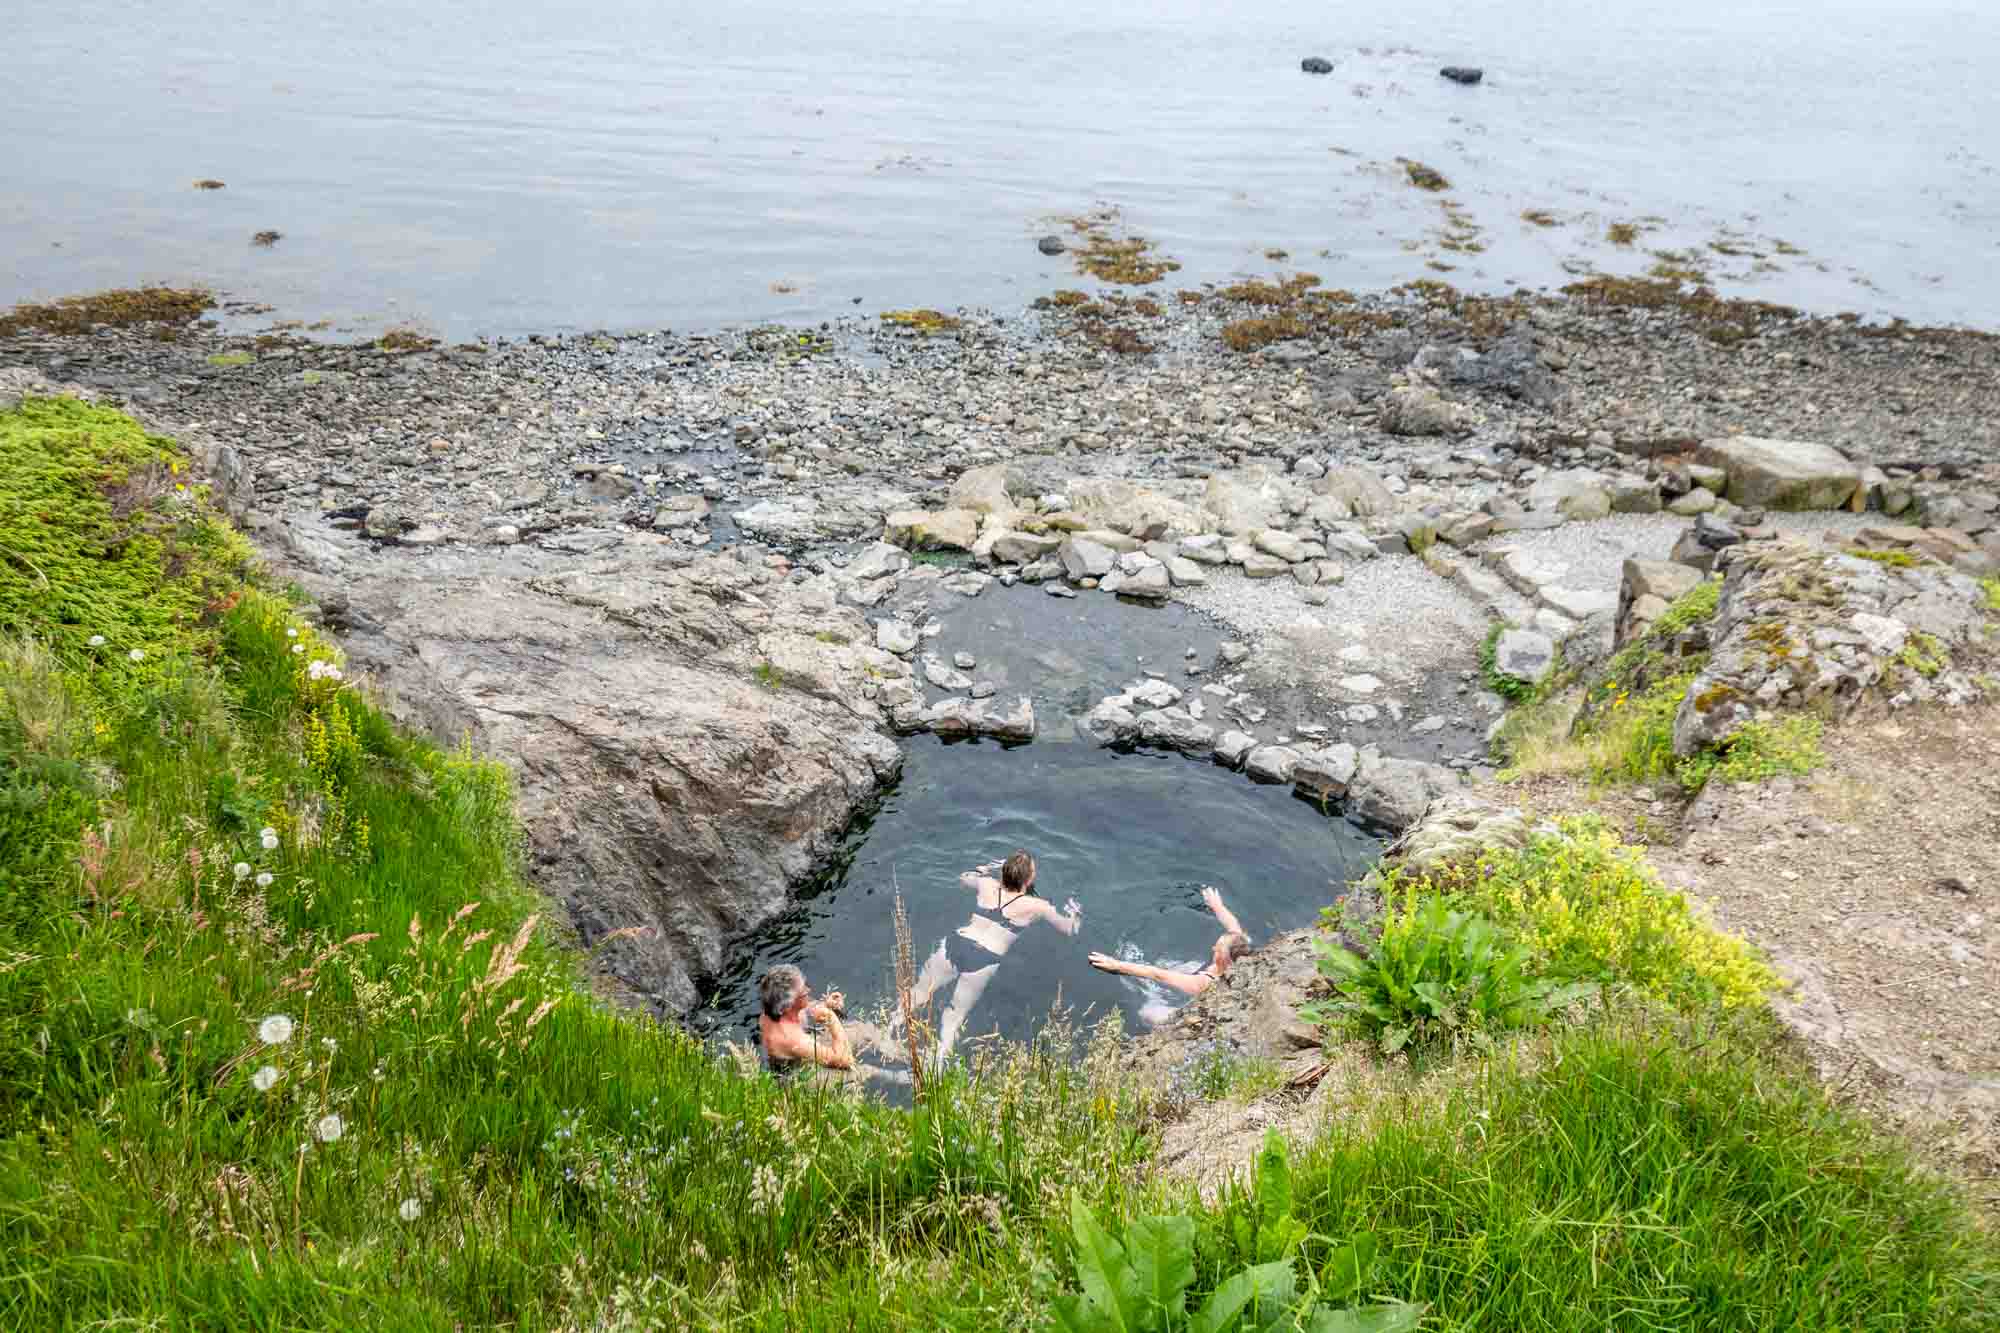 People sitting in hot springs at the edge of the ocean